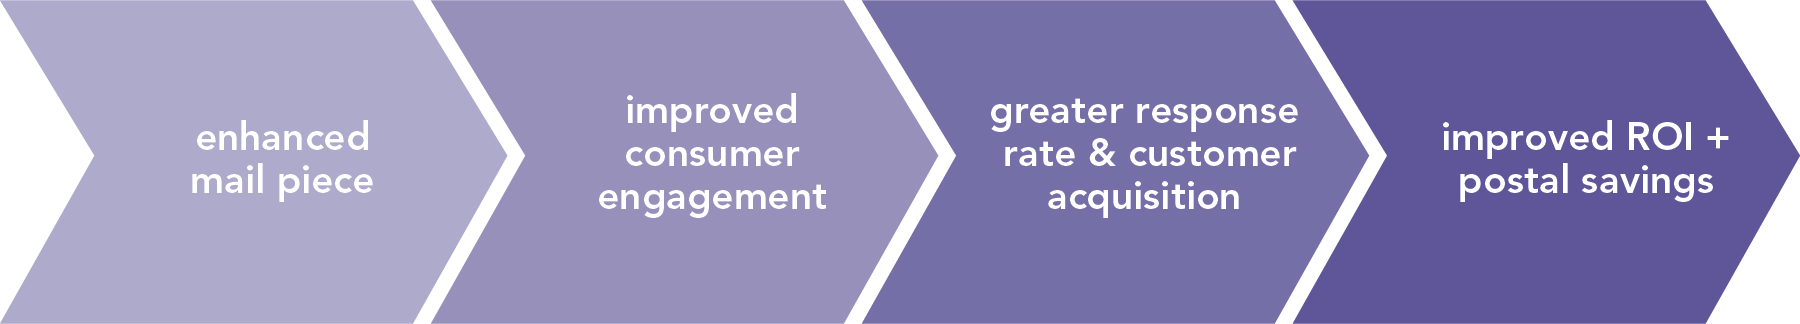 Enhanced mail piece leads to improved consumer engagement leads to greater response rate & customer acquisition leads to improved ROI and postal savings